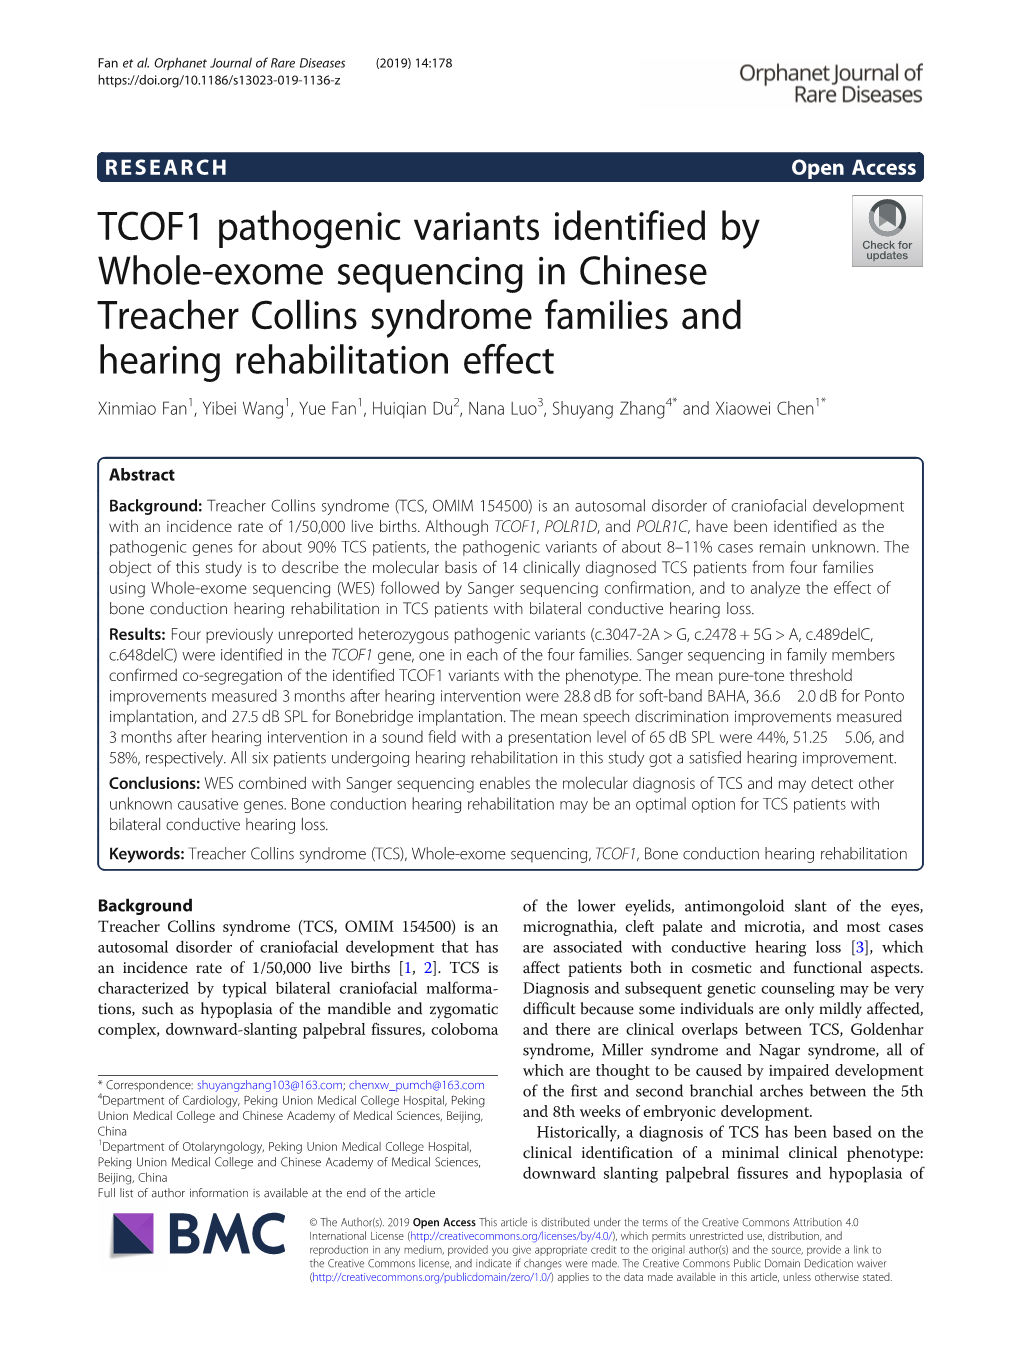 TCOF1 Pathogenic Variants Identified by Whole-Exome Sequencing in Chinese Treacher Collins Syndrome Families and Hearing Rehabil